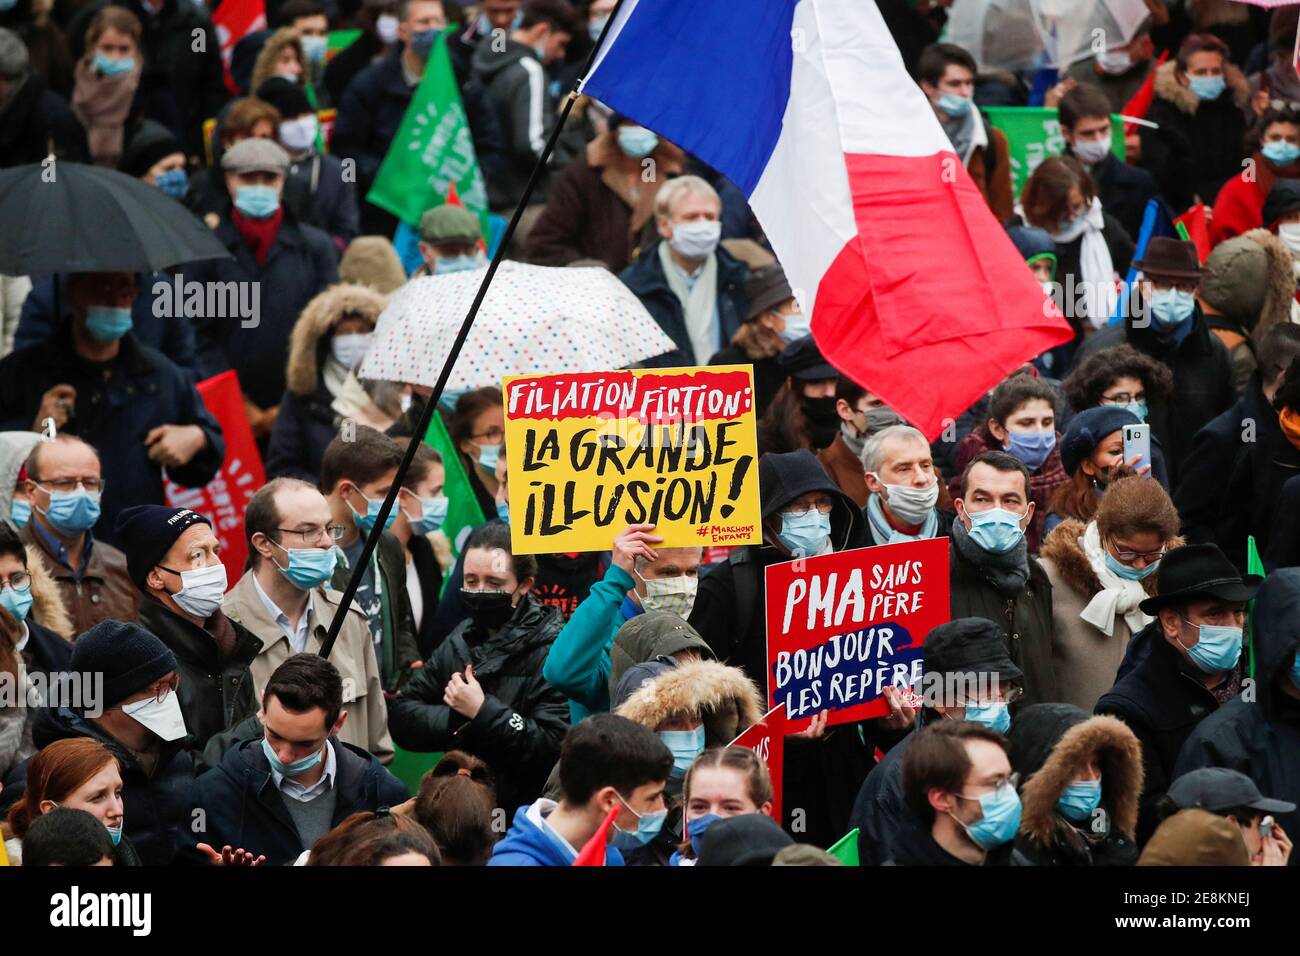 A person holds a placard reading ''Fictional filiation: The great illusion!'' during a protest against medically assisted procreation PMA, surrogate motherhood GPA and the bioethics bill in front of the Health Ministry in Paris, France, January 31, 2021. REUTERS/Benoit Tessier Stock Photo